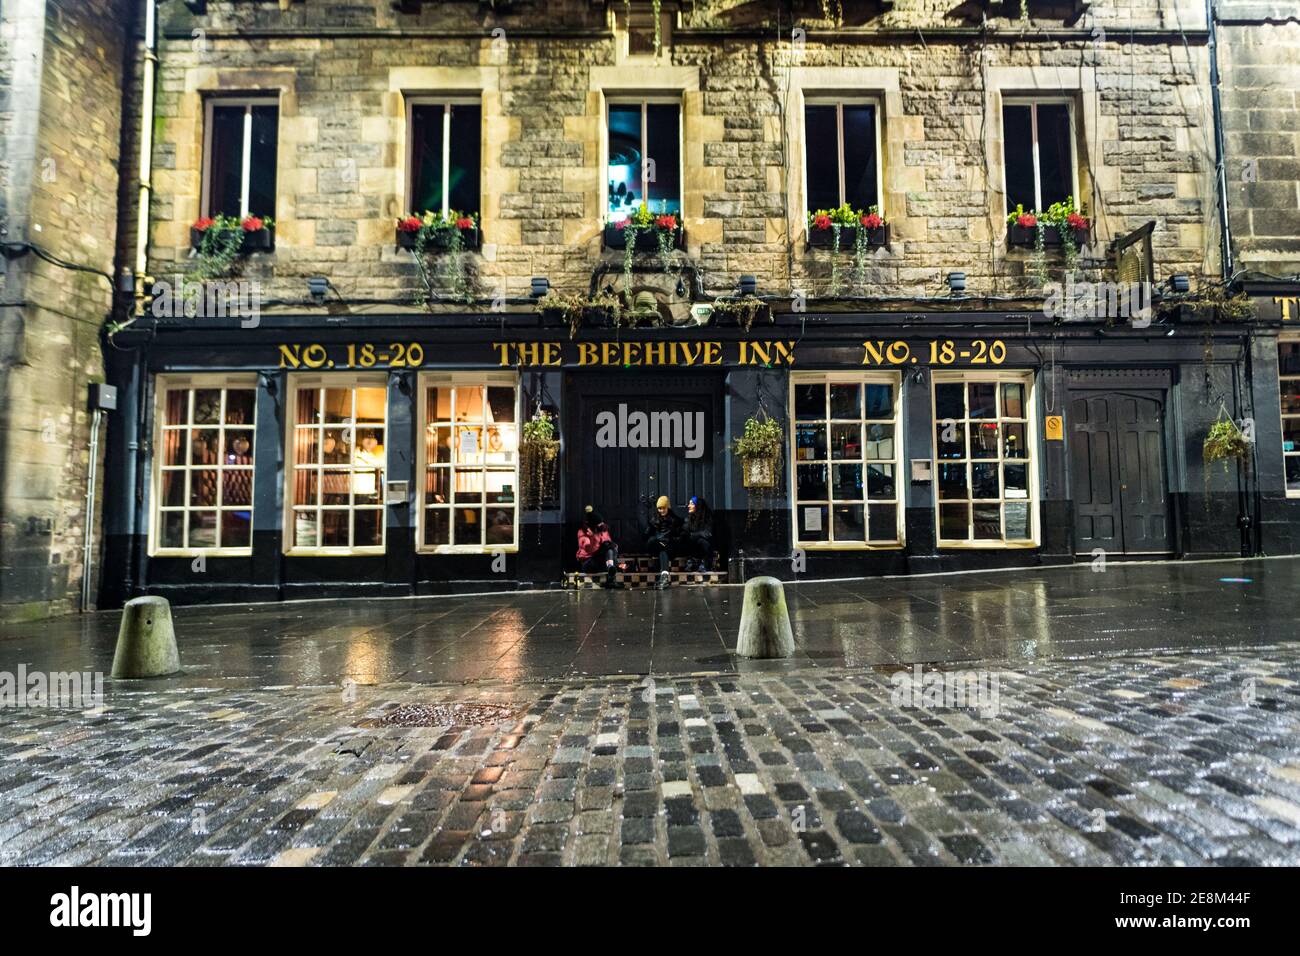 Sat 30 January 2021. Edinburgh, UK. Traditionally the final weekend of January is the first payday after Christmas and a peak business time for Edinburgh’s pubs and bars. The current Covid-19 lockdown restrictions in Edinburgh means that they are closed and this was the view at The Beehive Inn on the Grassmarket. Stock Photo